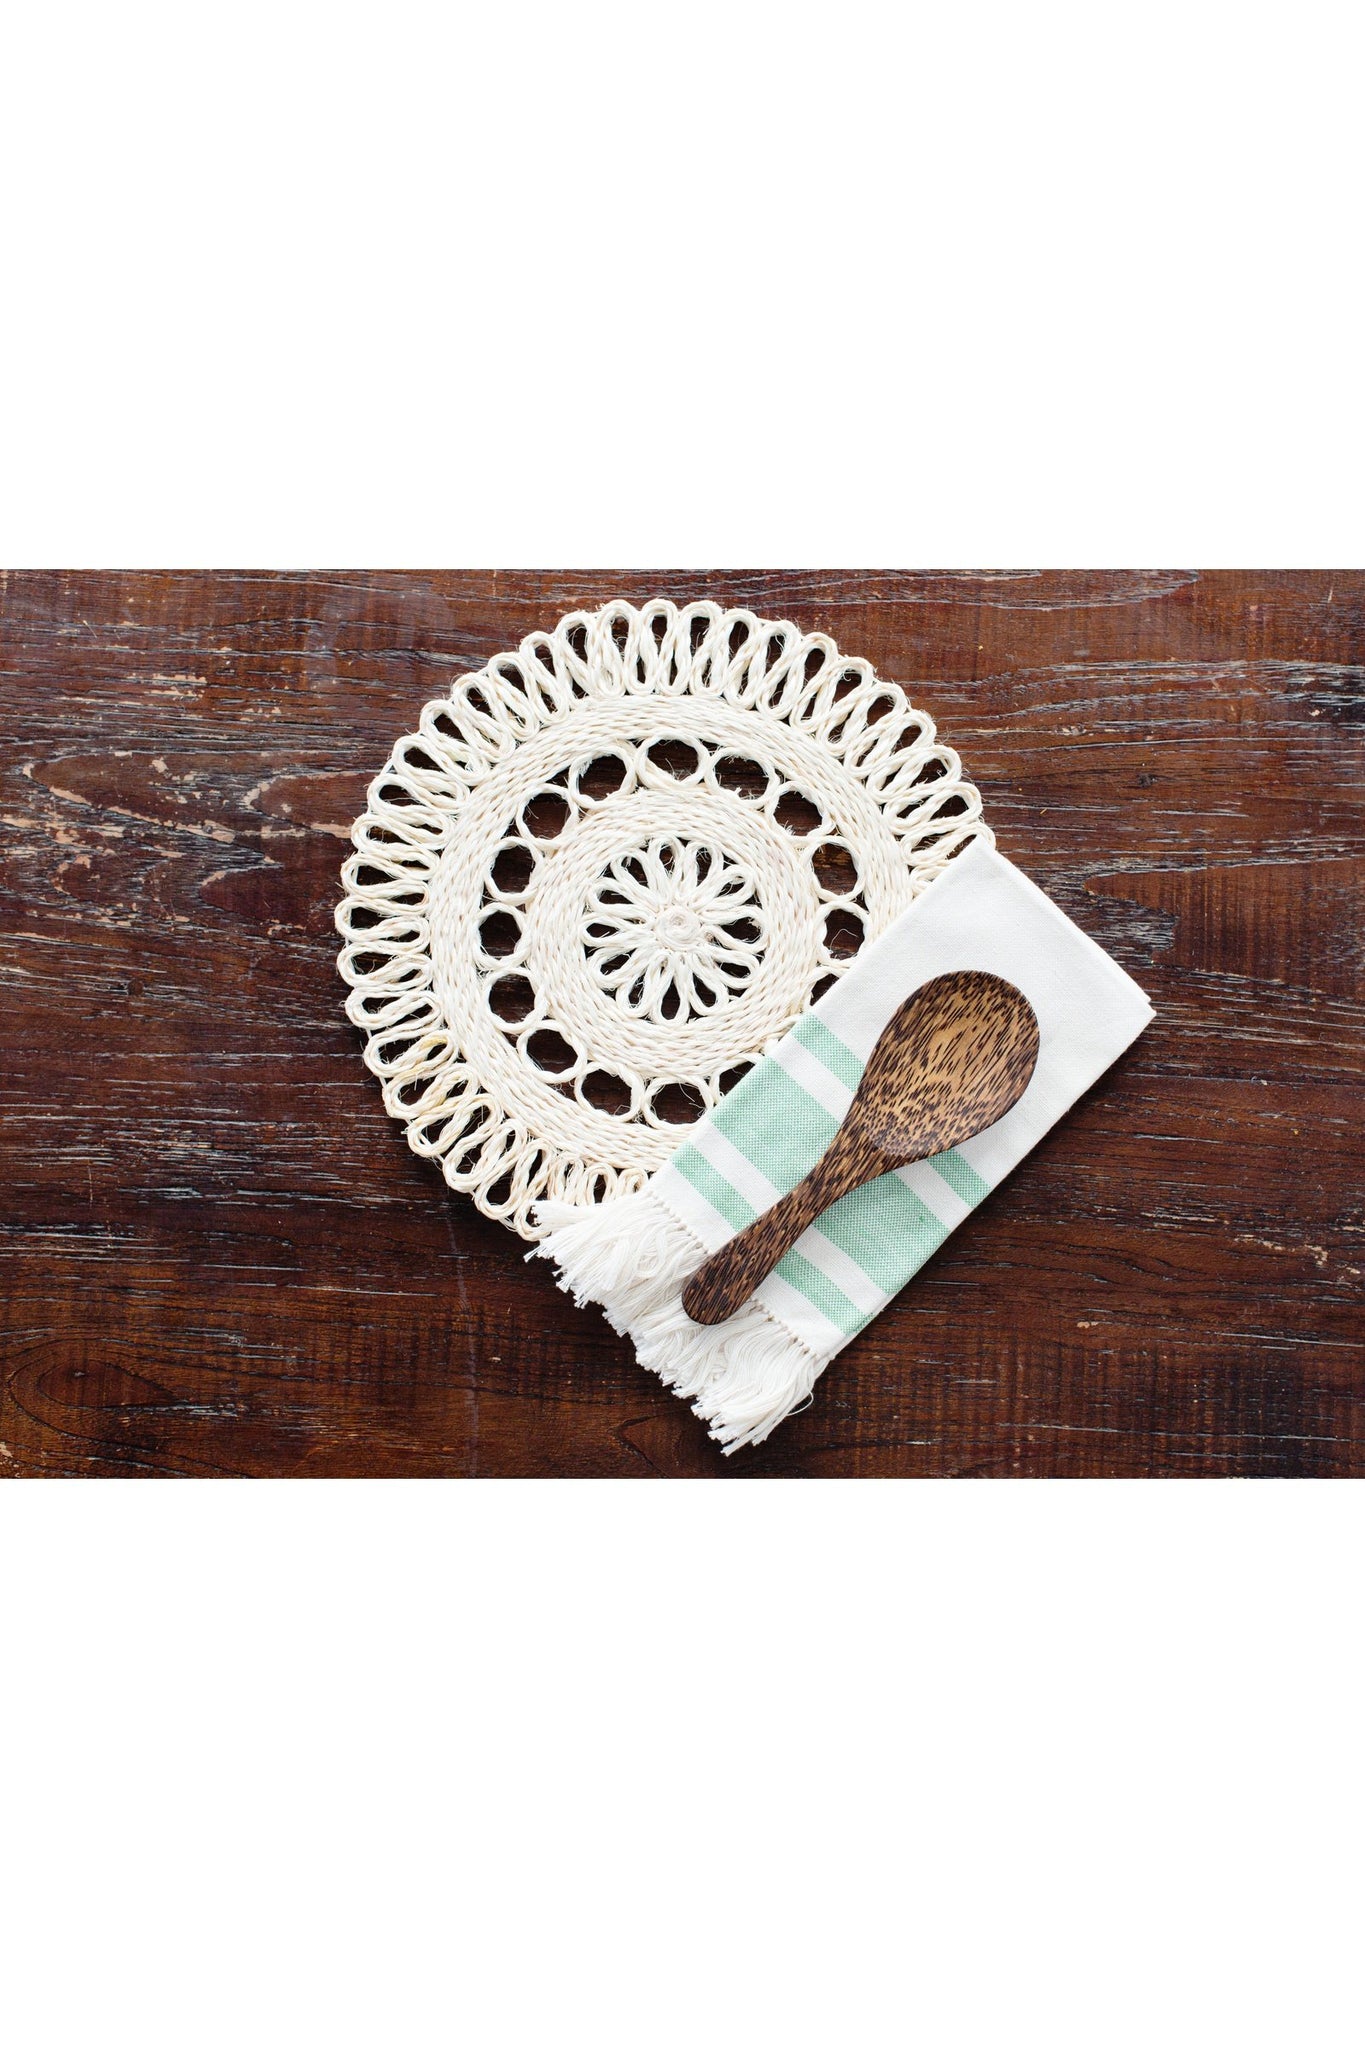 Handwoven Seagrass Placemat Trivet | All Natural